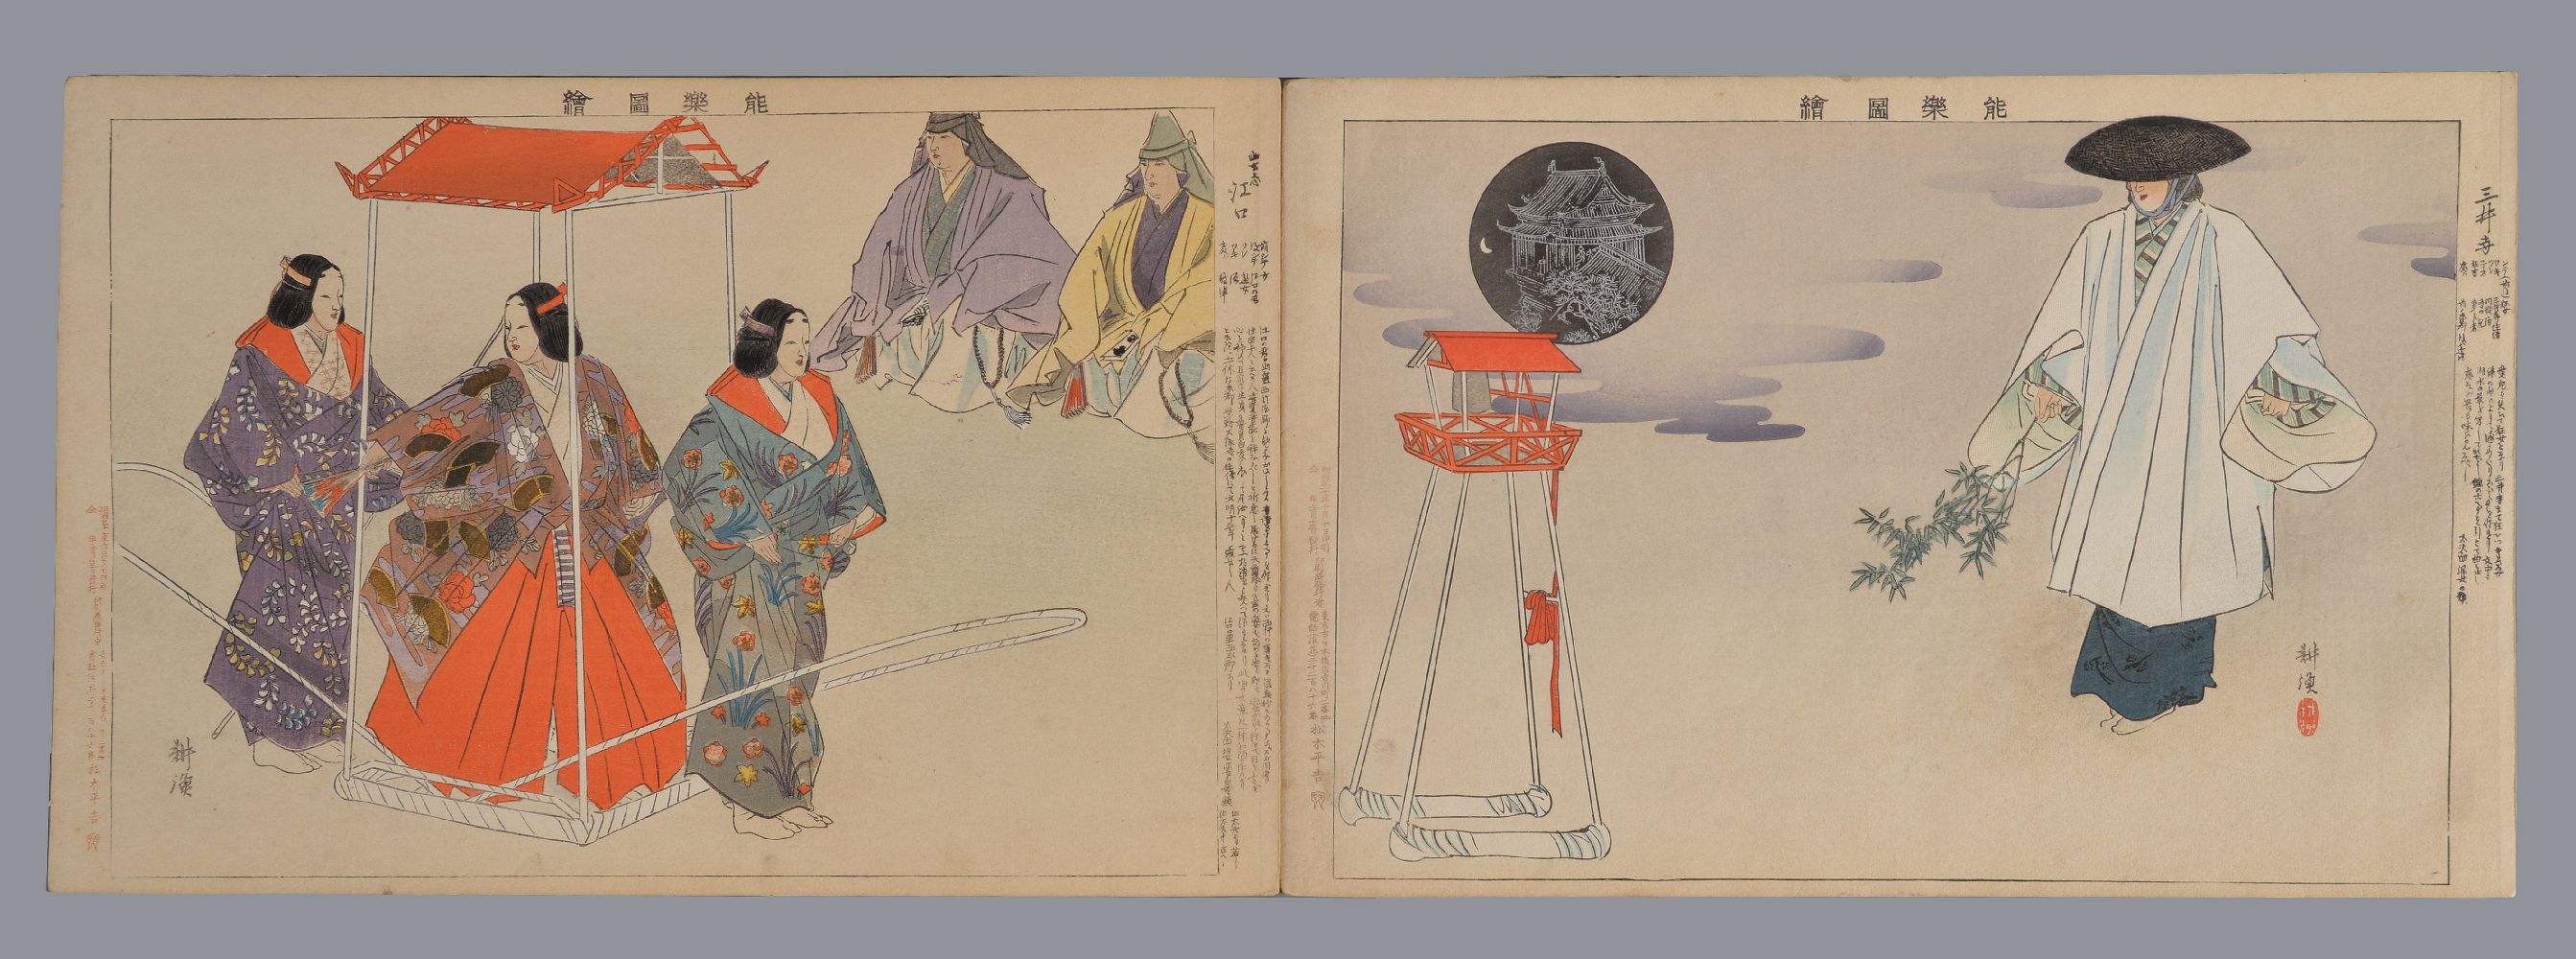 Tsukioka Kogyo (1869-1927): An Album of Forty Japanese Woodblock Prints (plus title pages) in inks a - Image 2 of 4